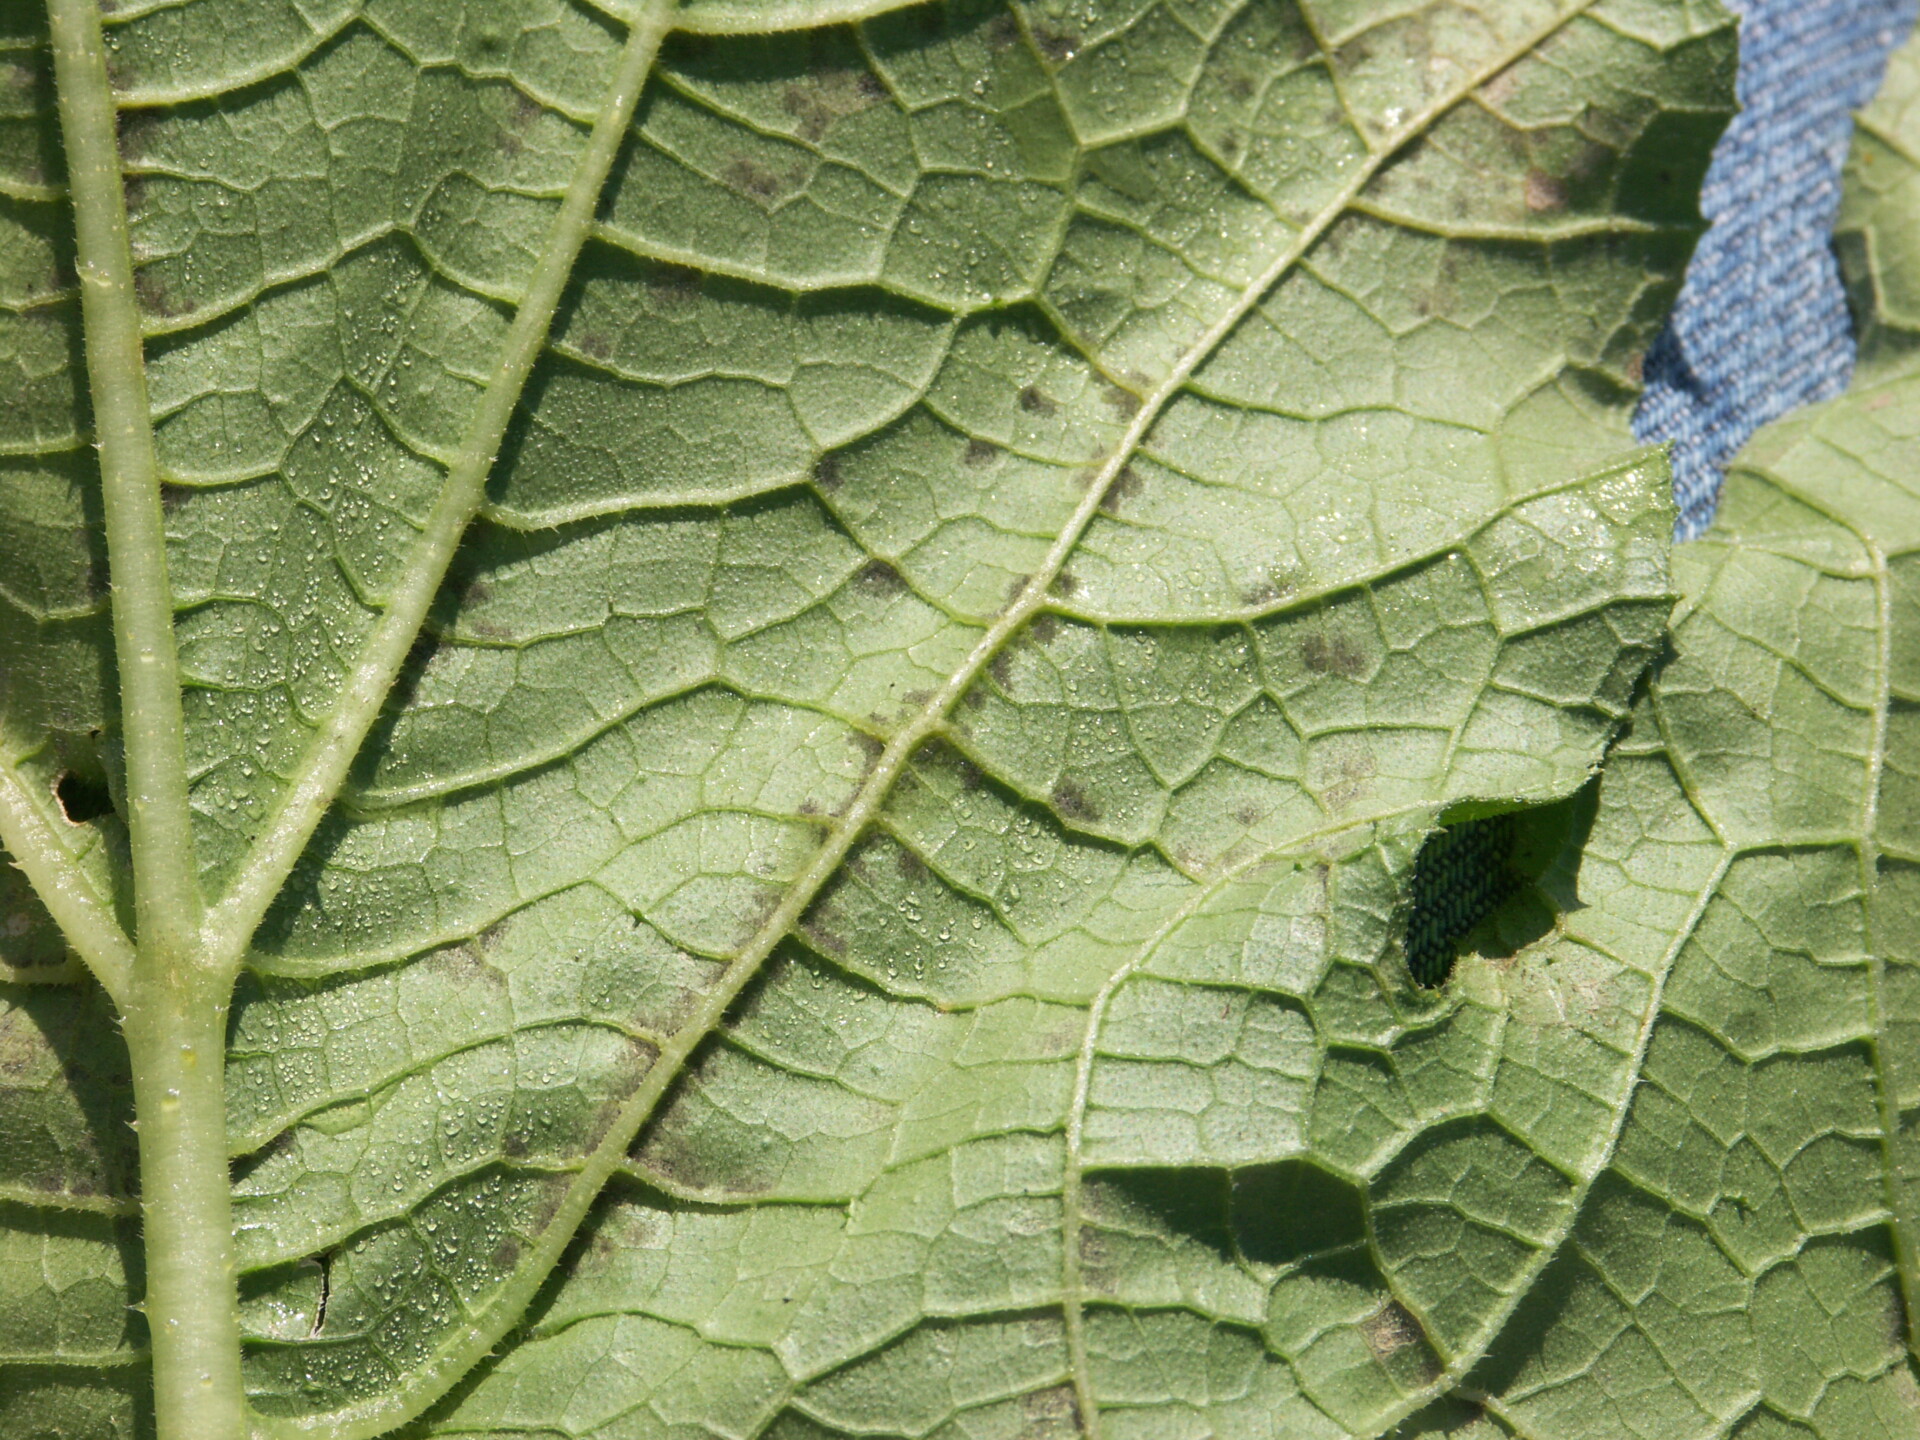 Downy mildew of pumpkin. Sporulation is visible on the underside of the leaf near the vein where moisture has accumulated.